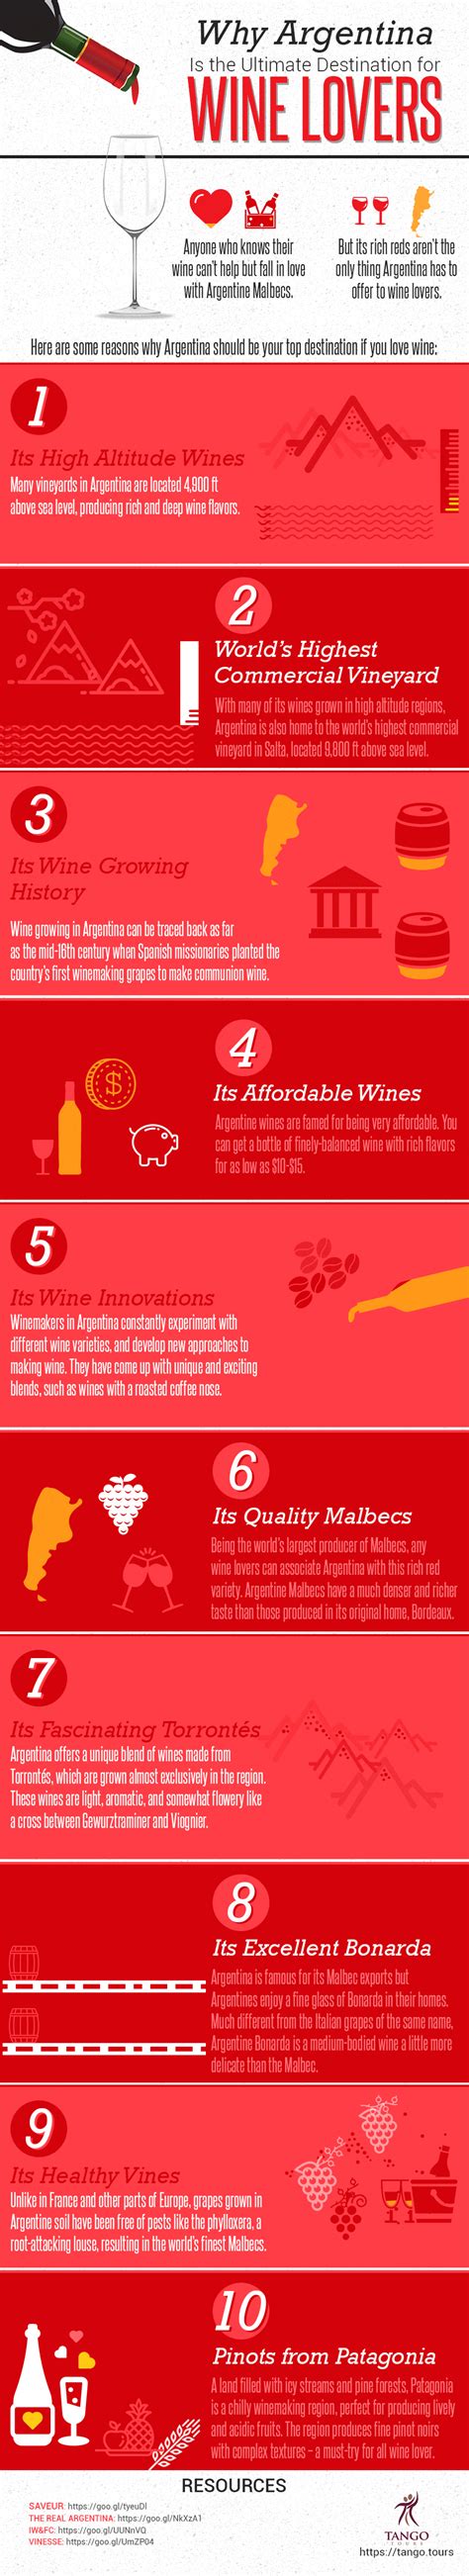 Argentina is considered to be one of the most reputable wine regions in ...